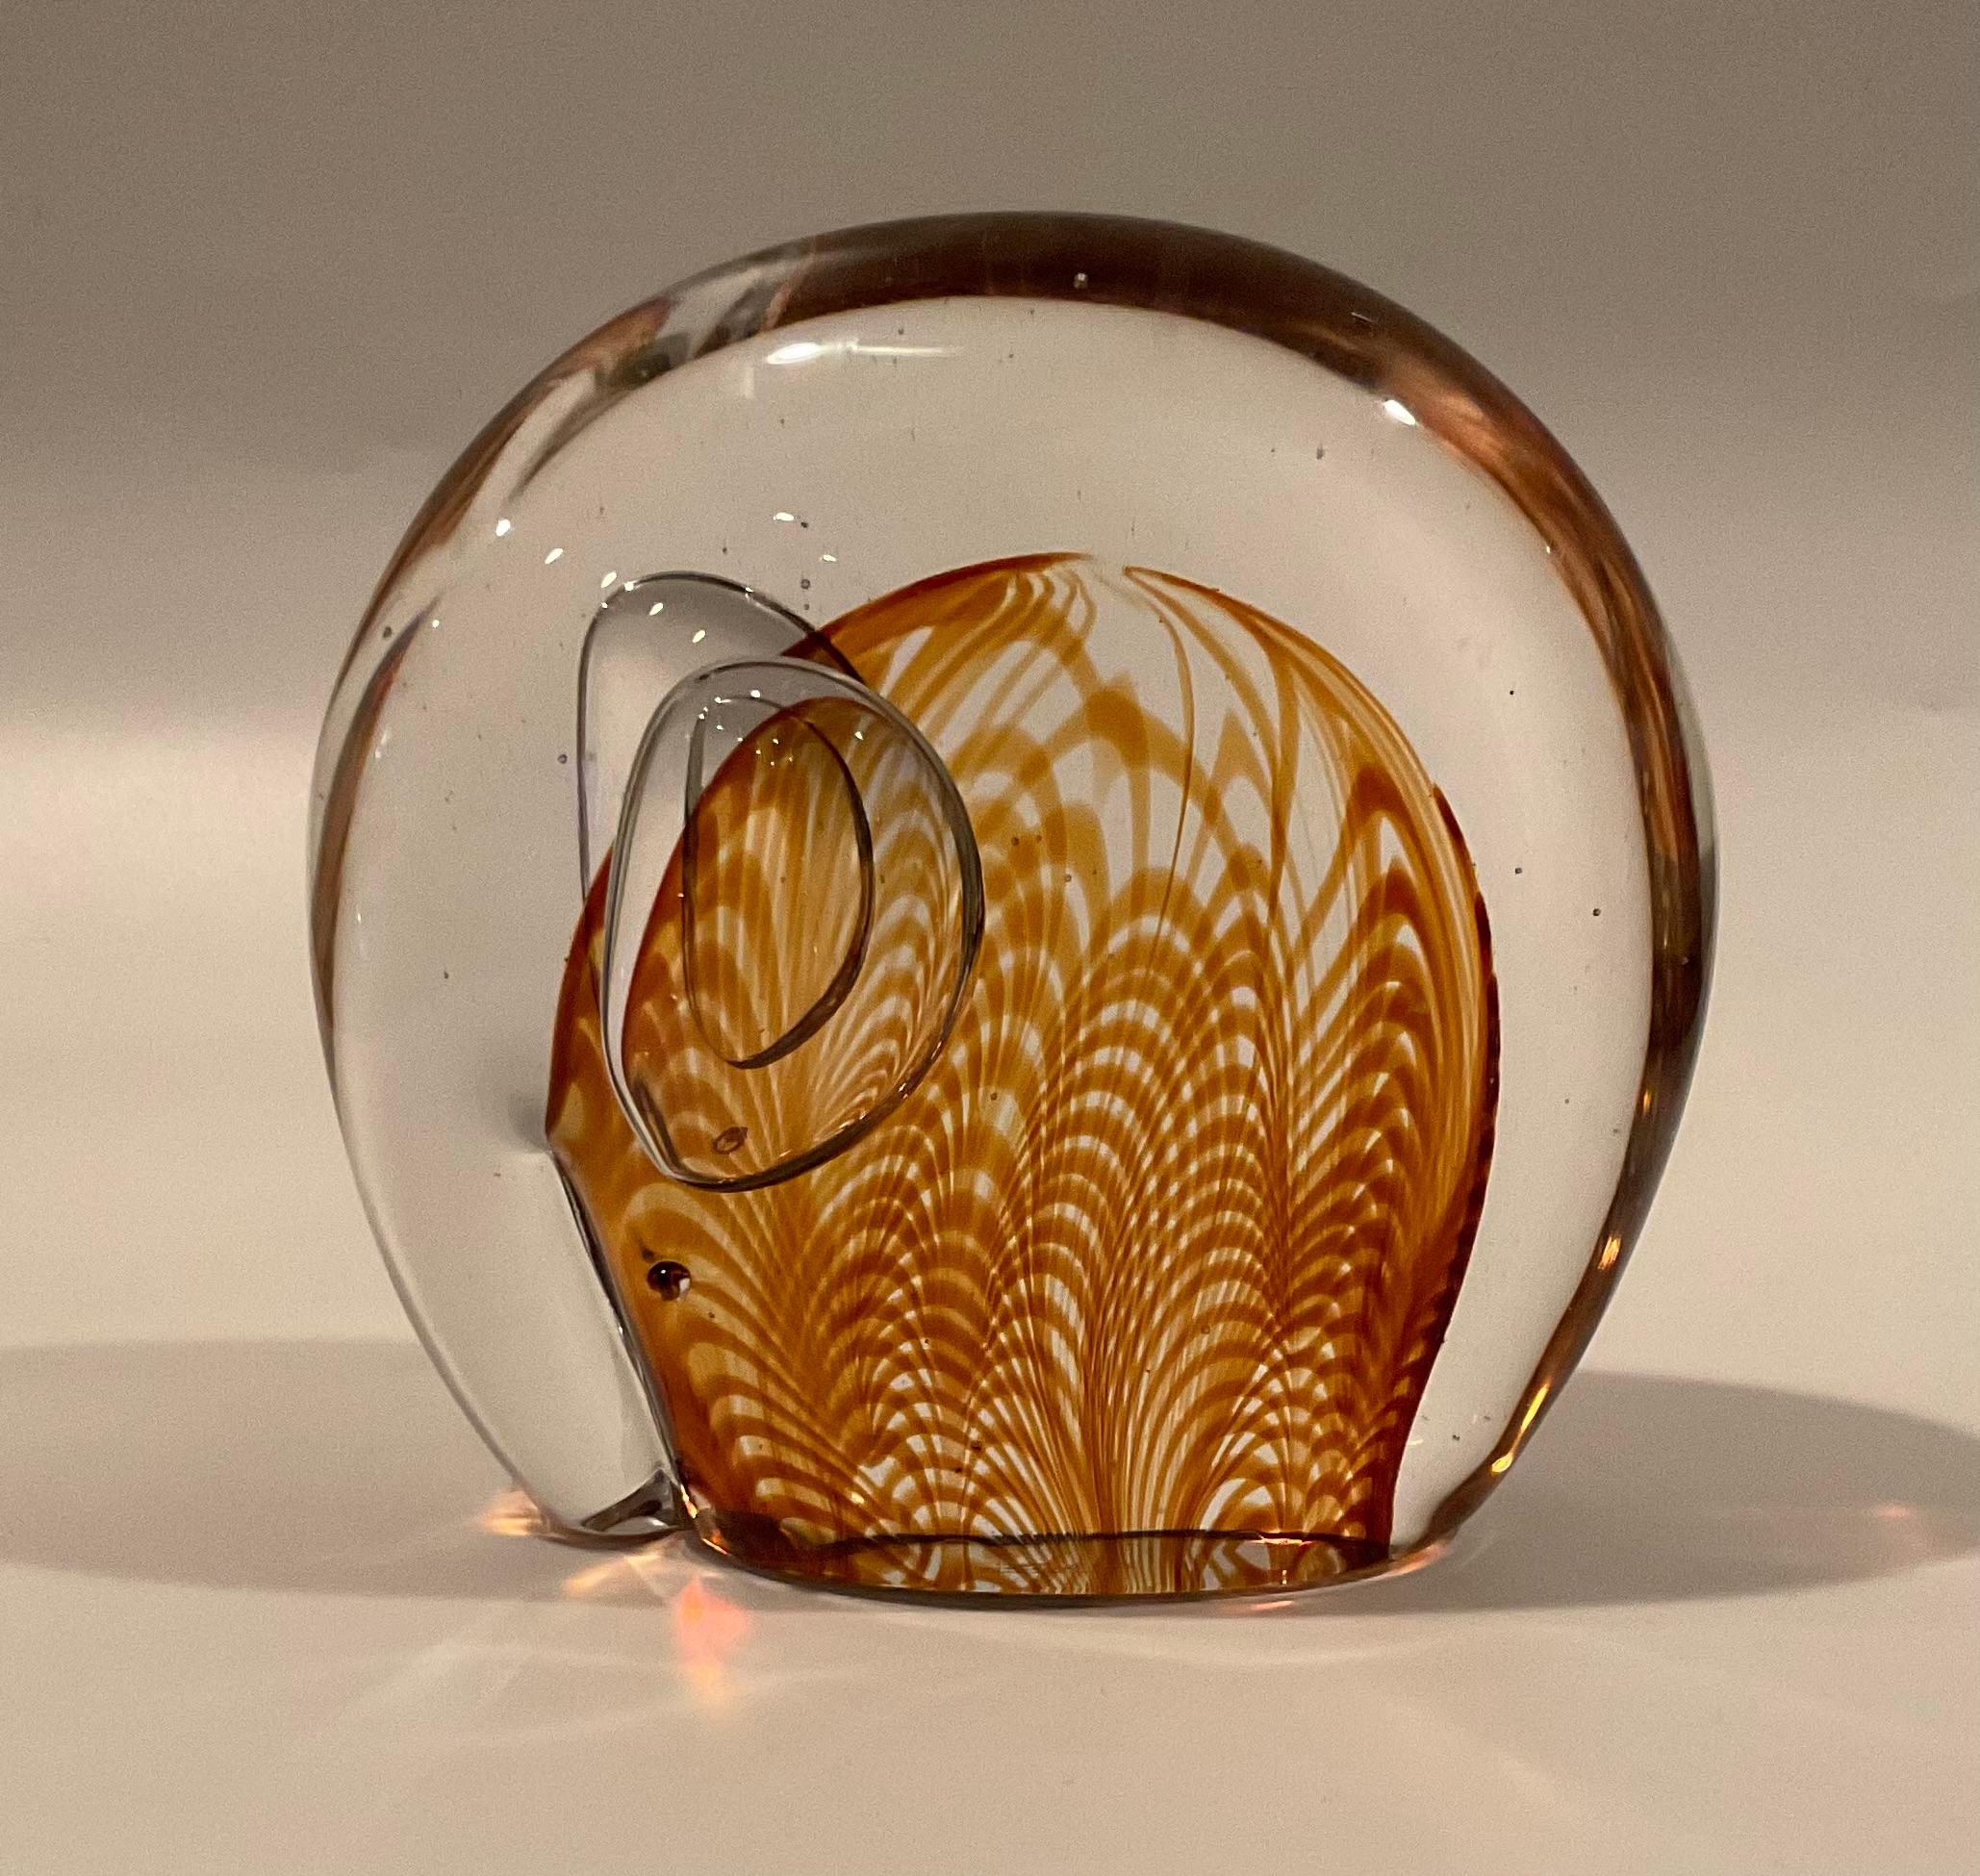 Art Glass Cenedese Murano Elephant Figure in Fenitio glass signed by the artist. 